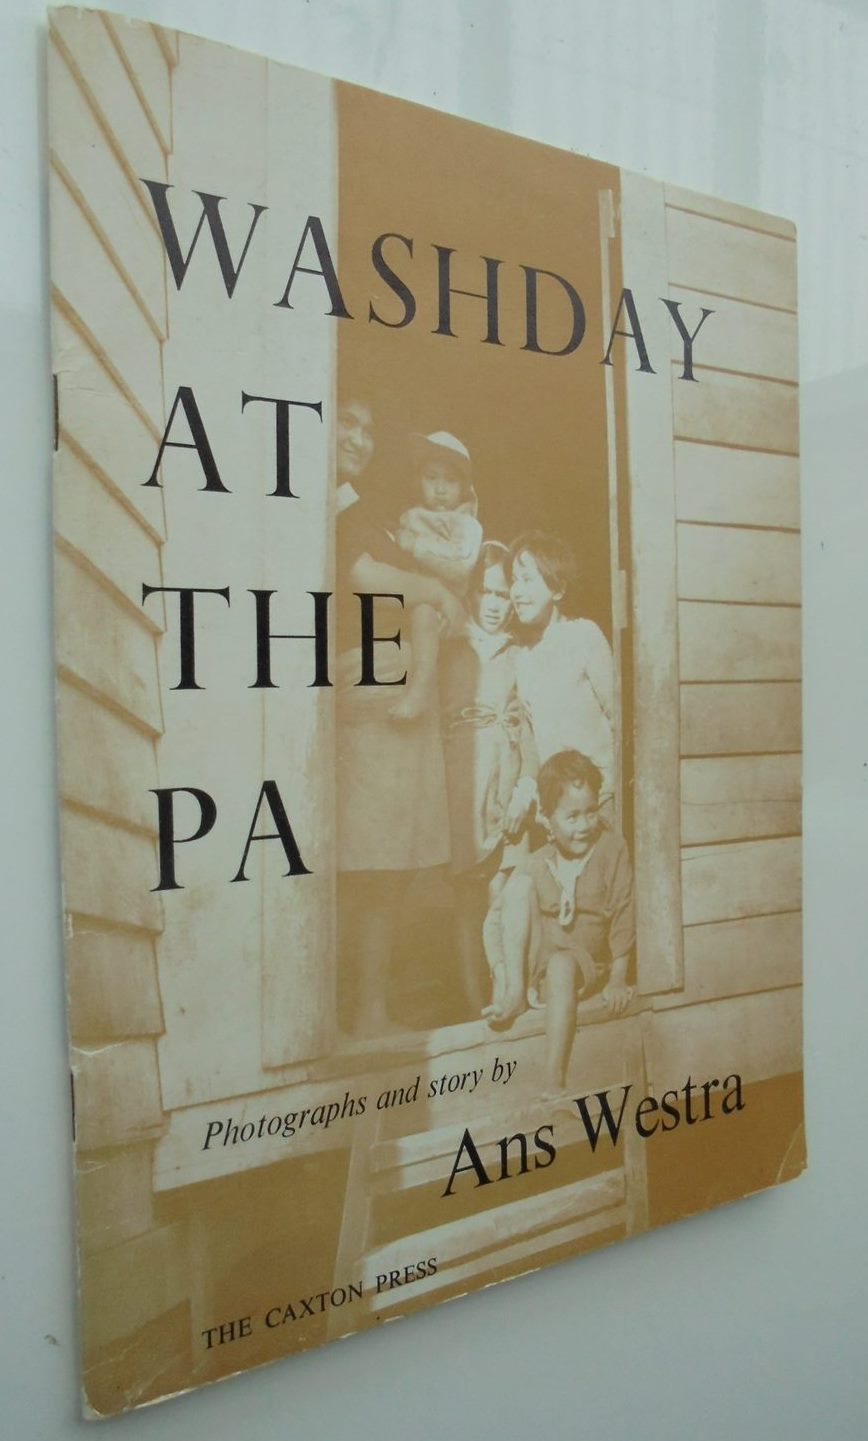 Washdat at the Pa - by Ans Westra. [With publisher's note booklet]